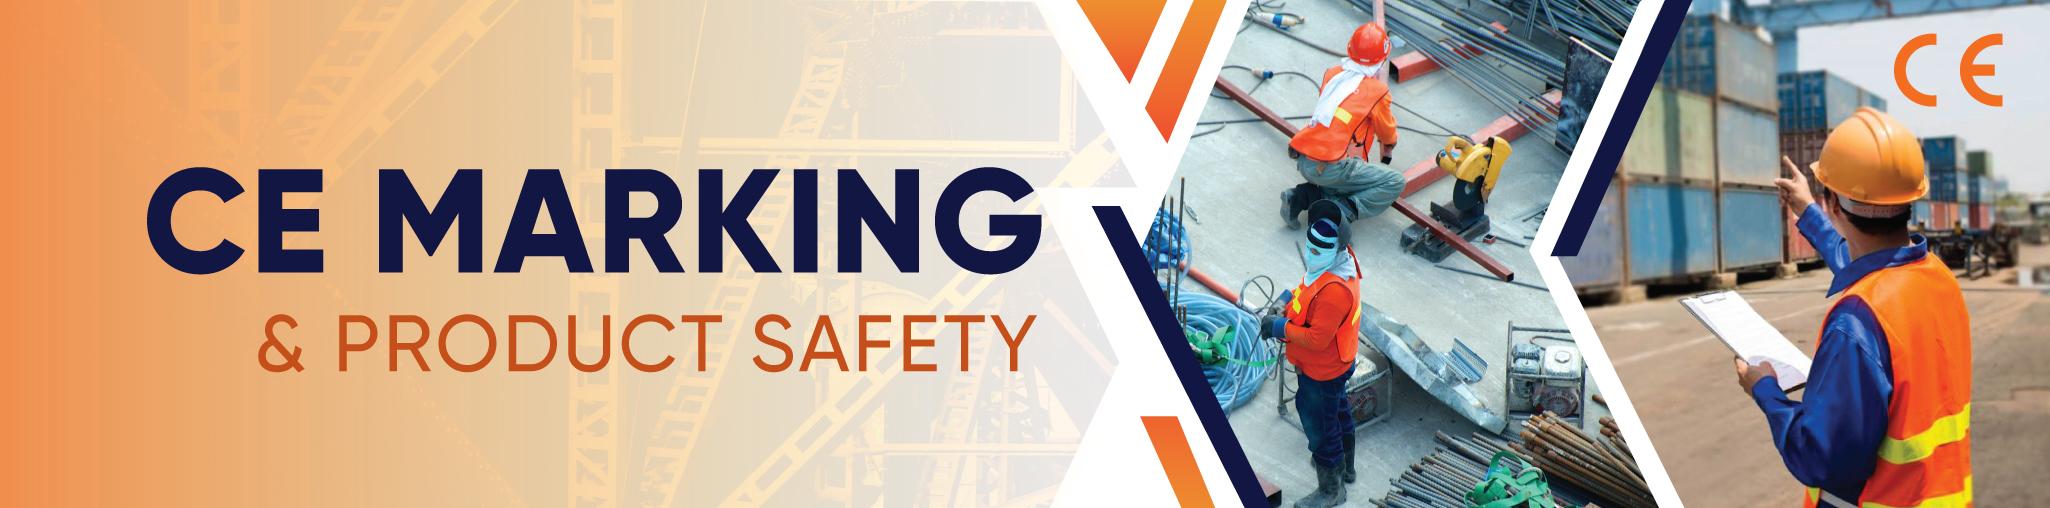 CE Marking for Product Safety